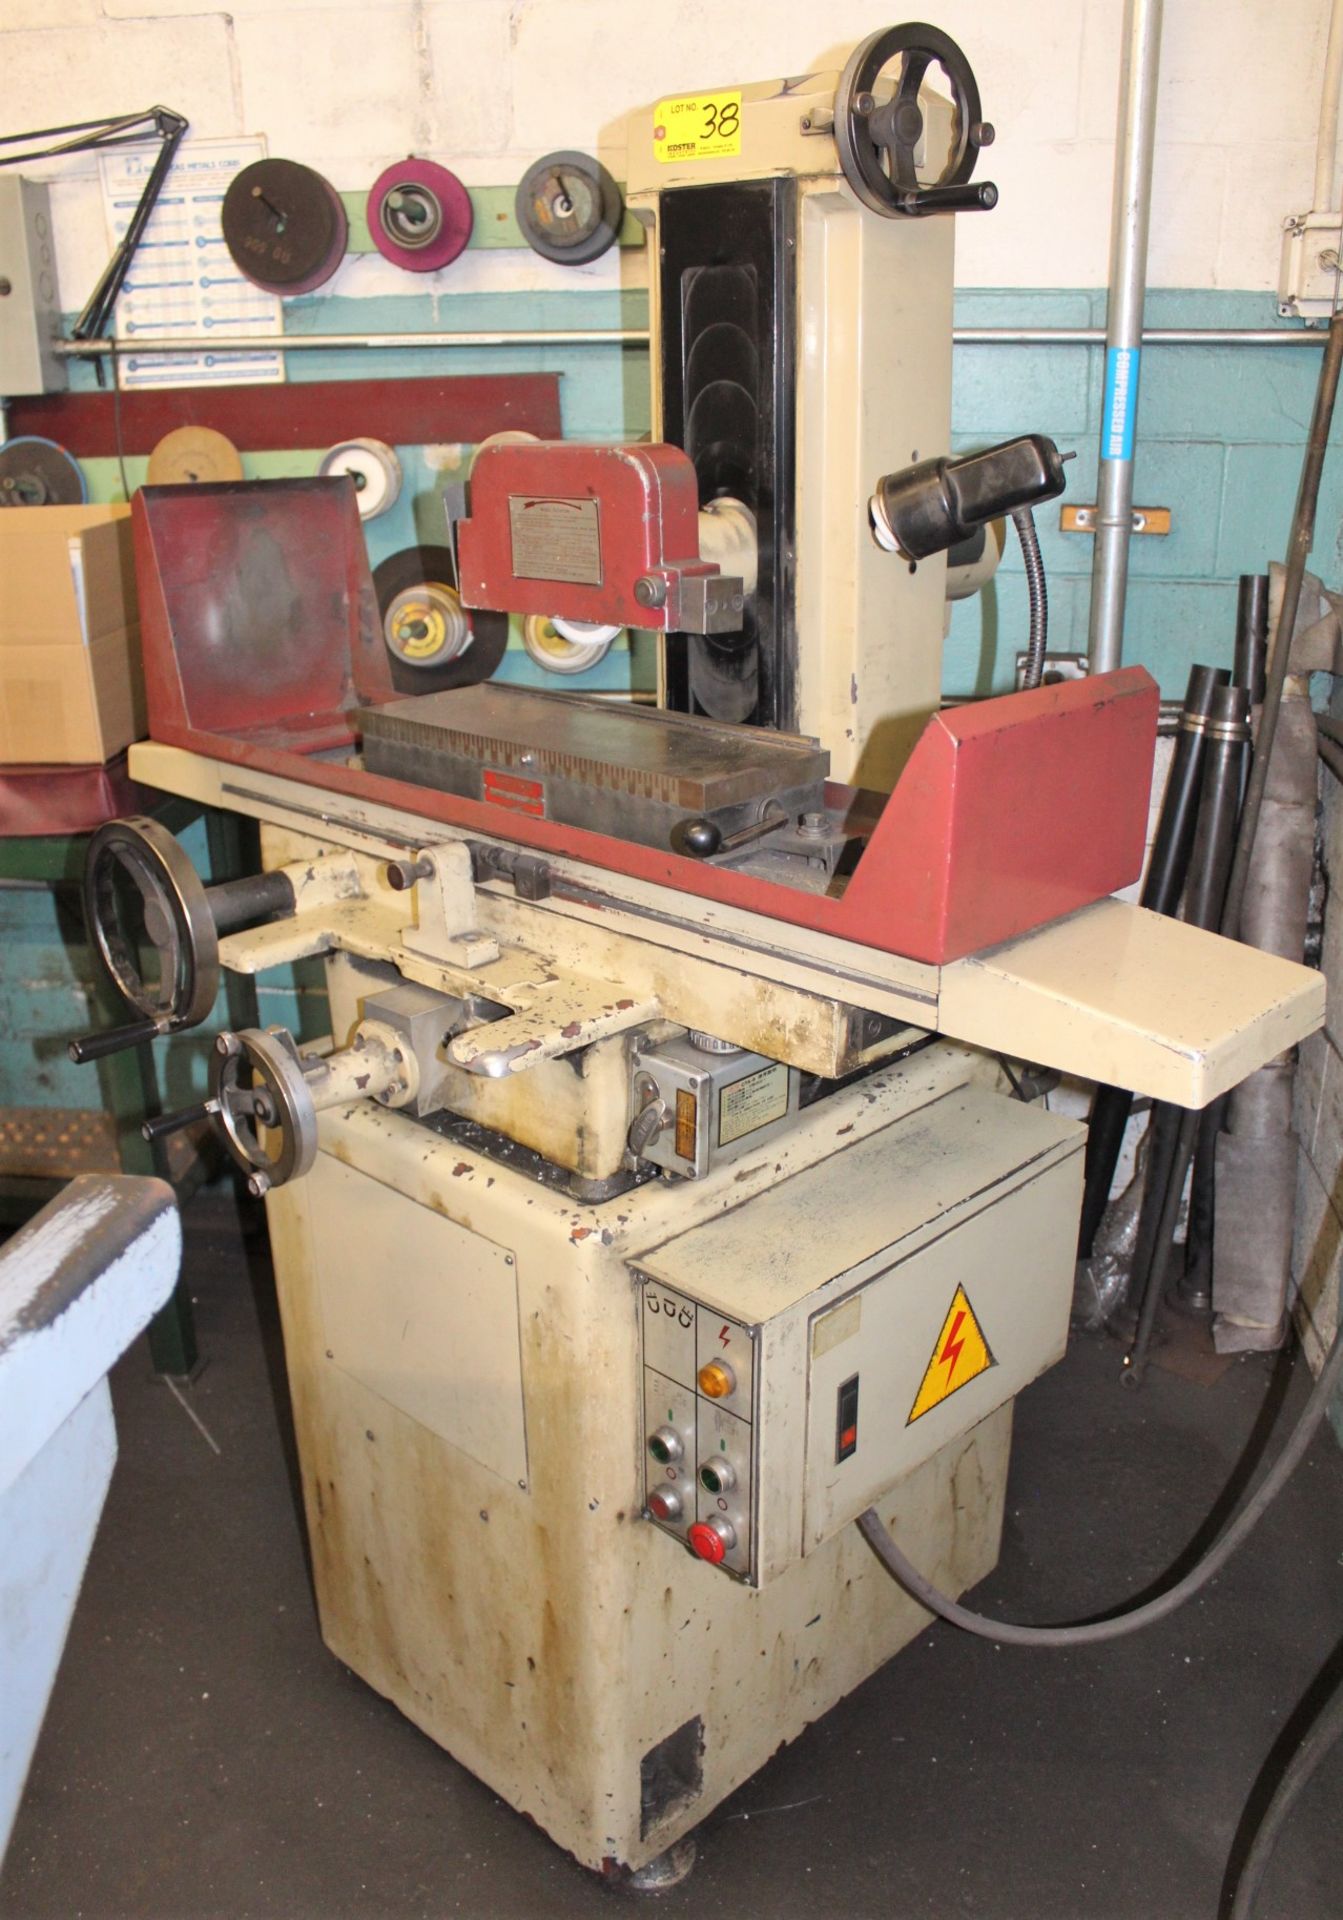 KENT MDL. KGS-618B 6" X 18" HAND FEED SURFACE GRINDER, S/N: 8842B041, PERMANENT MAGNETIC CHUCK